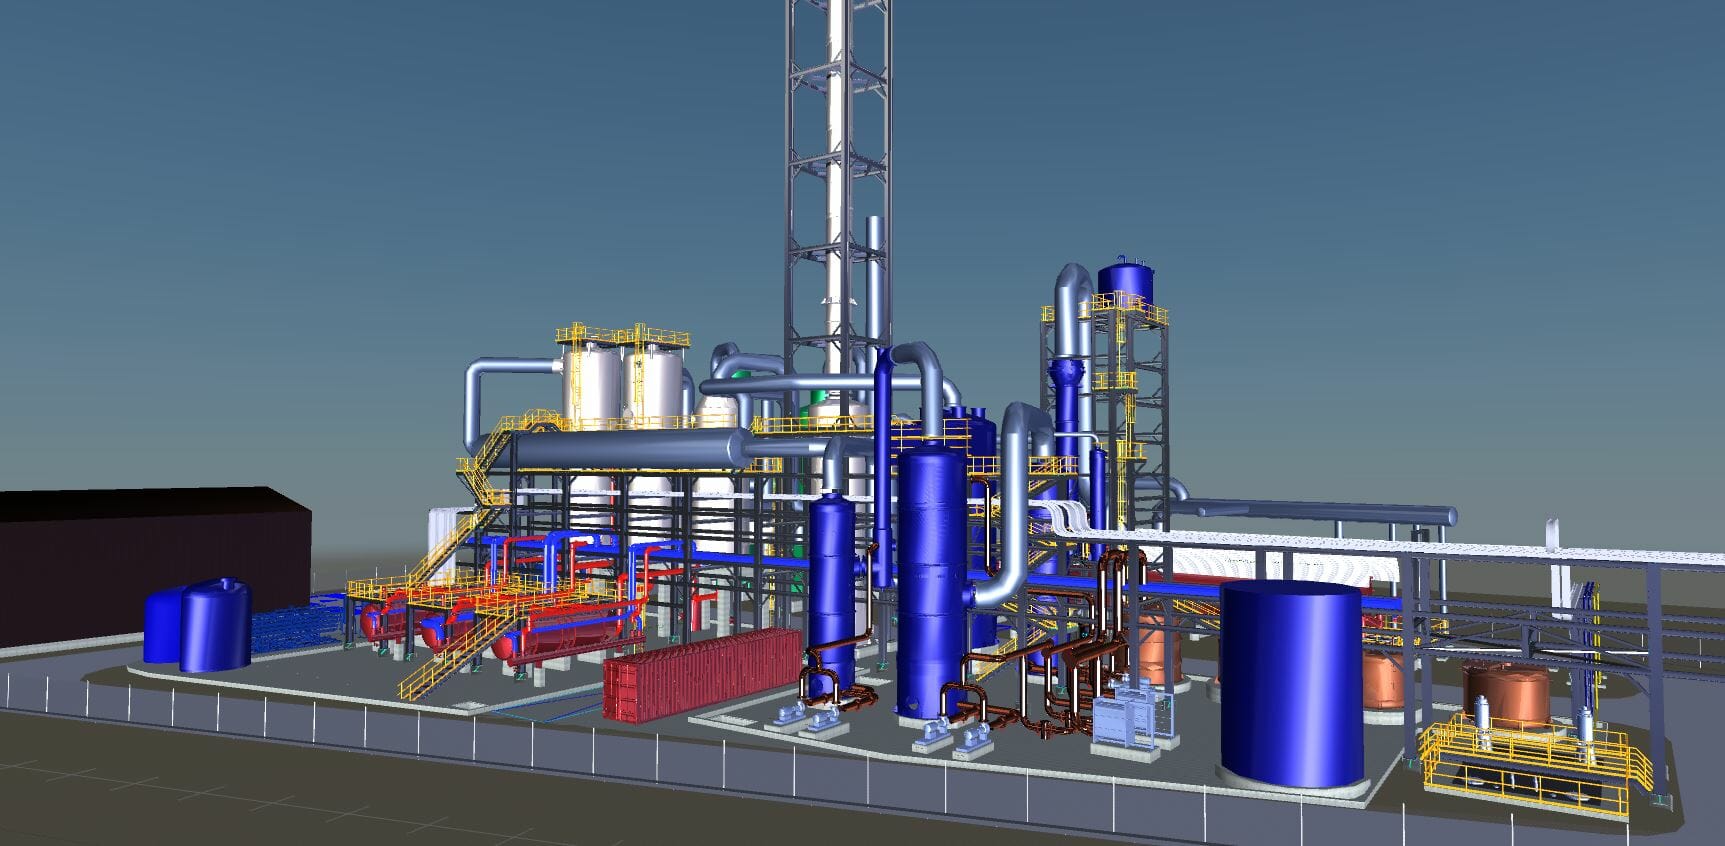 A 3D model of an oil refinery specializing in chemicals.